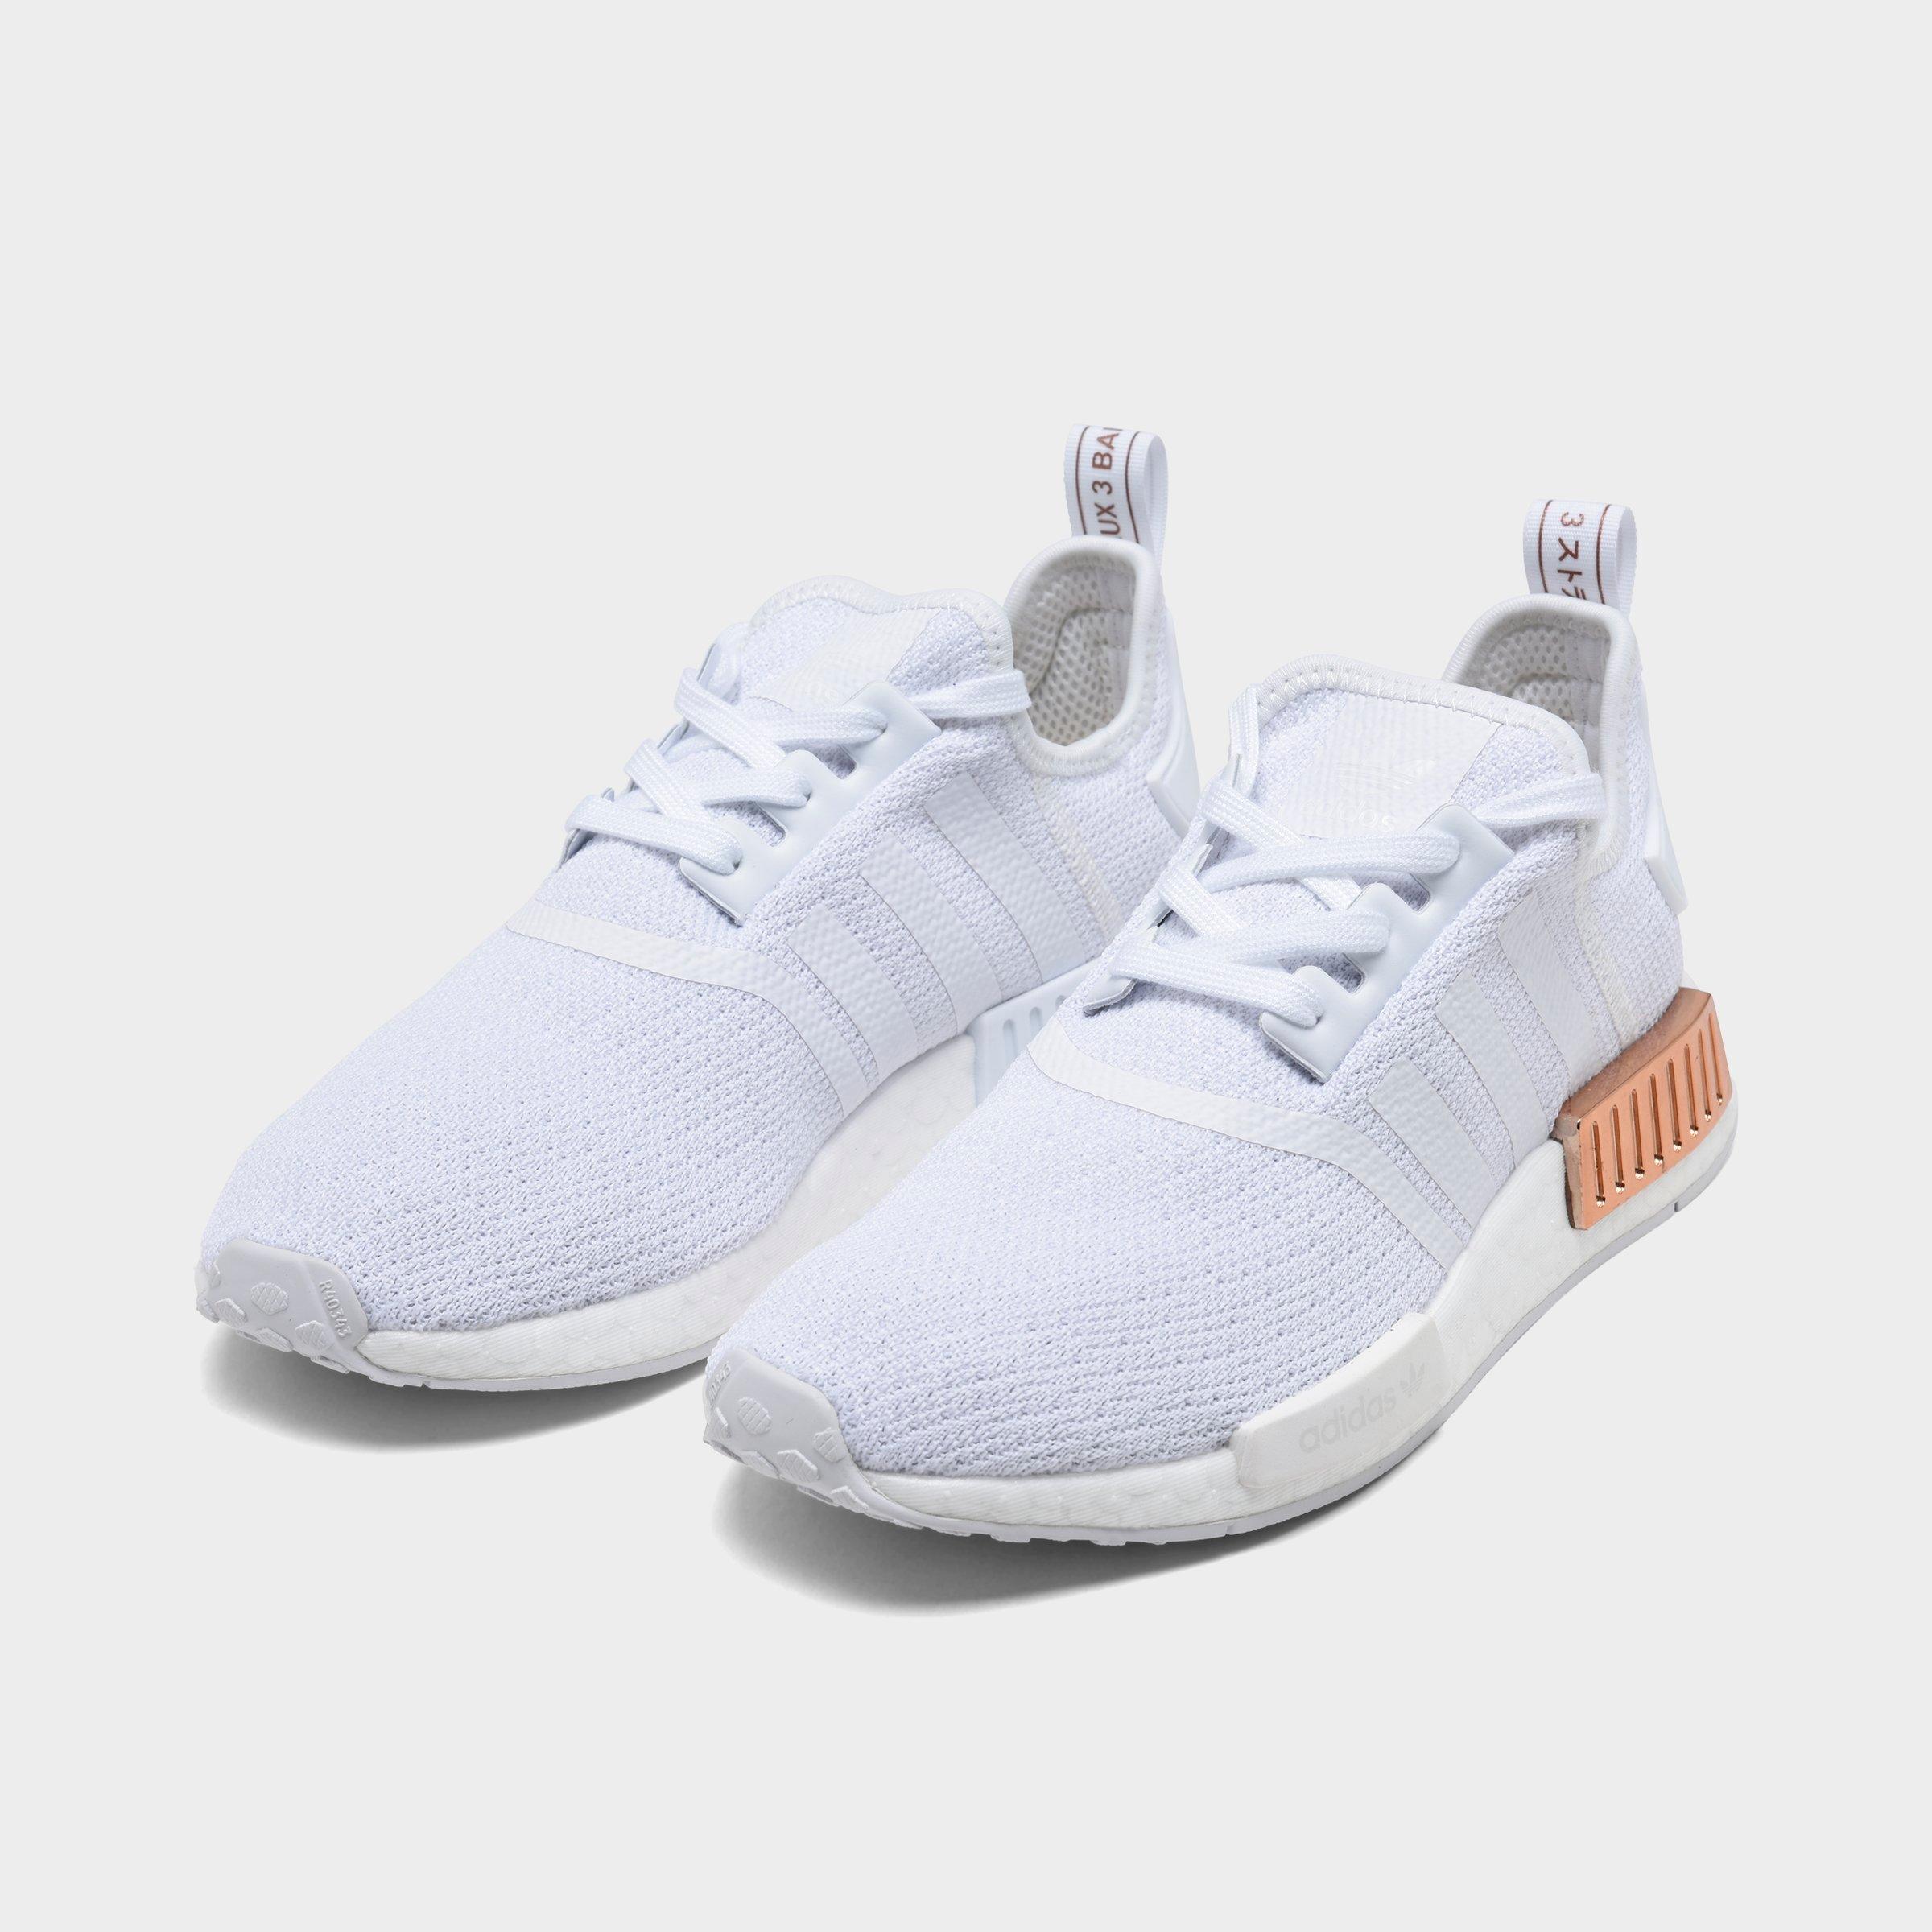 nmd r1 white shoes